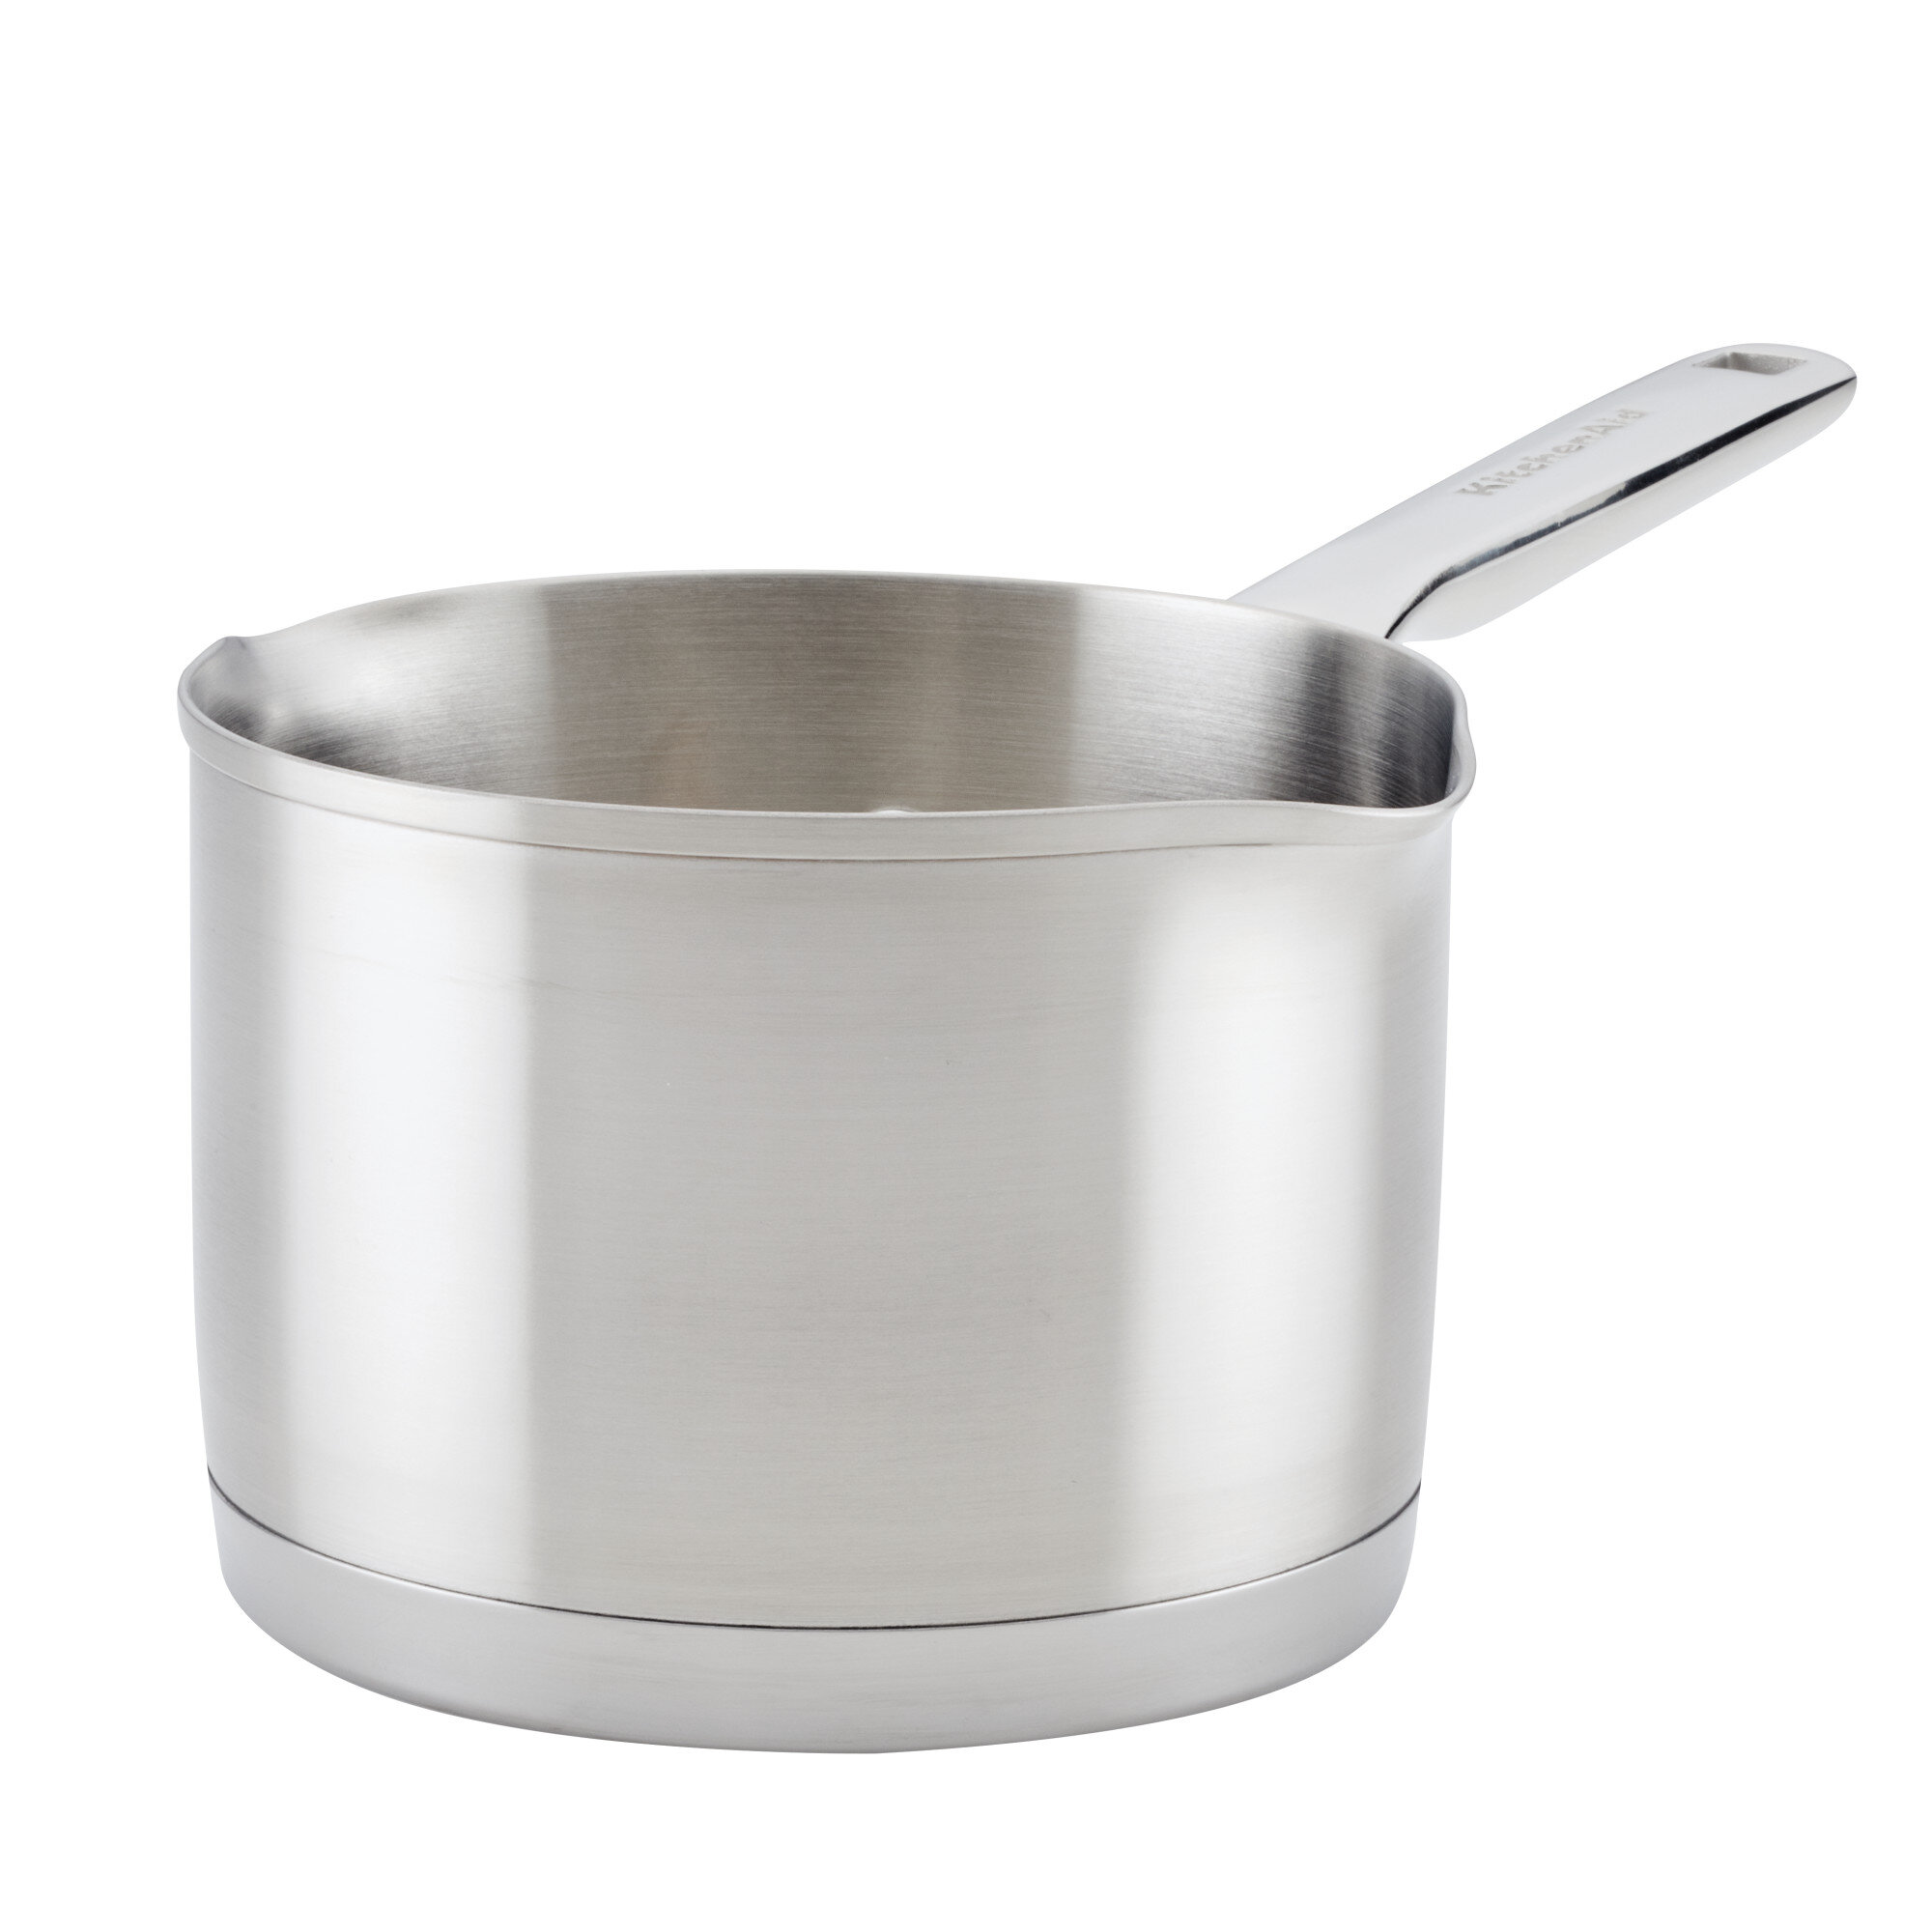 Cuisinart Custom-Clad 5-Ply Stainless Steel Saucepan with Lid | 3 qt.